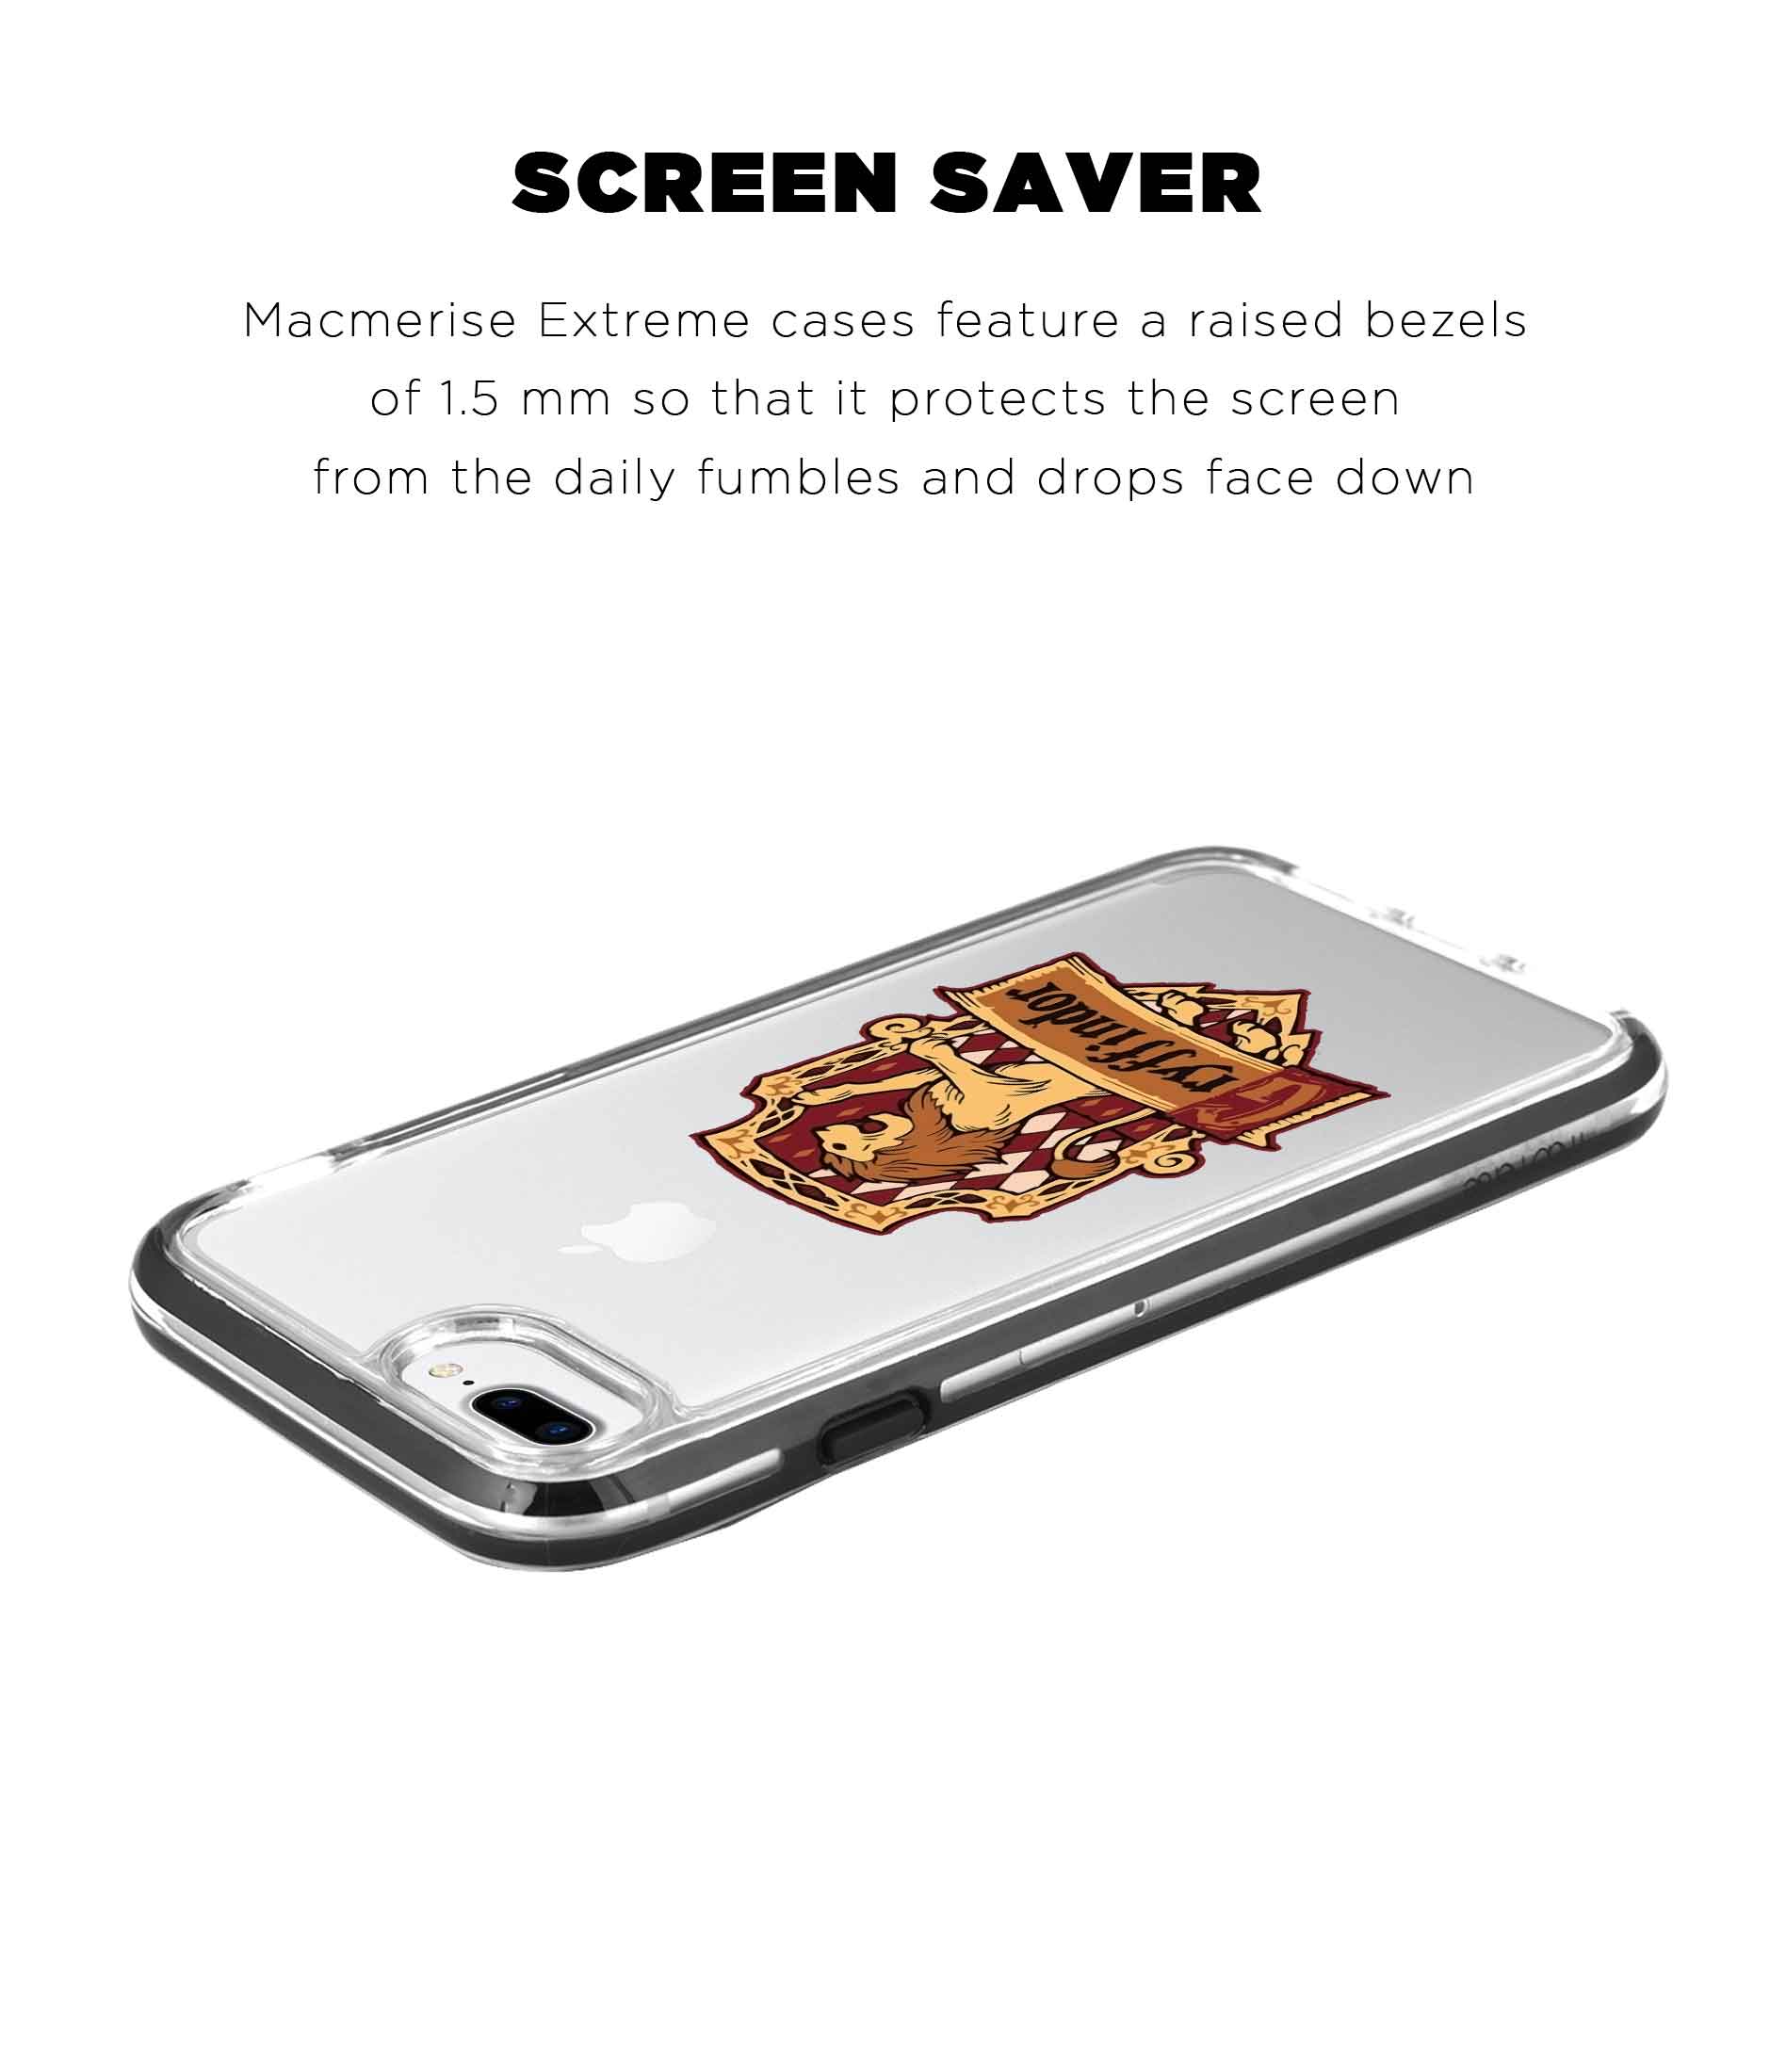 Crest Gryffindor - Extreme Phone Case for iPhone 7 Plus